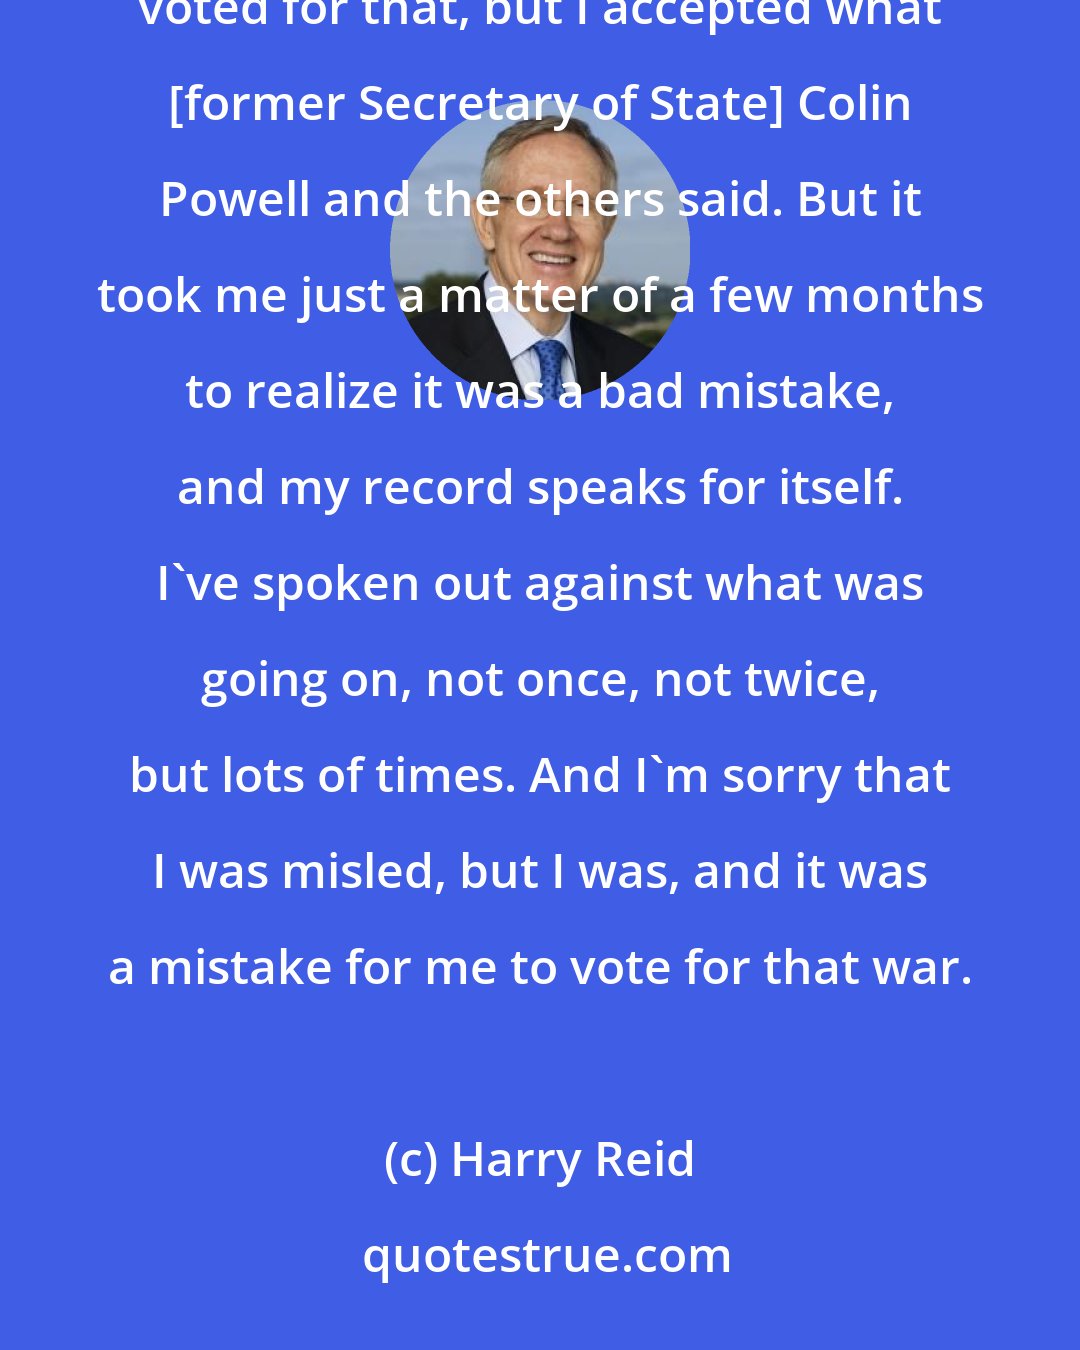 Harry Reid: Do you know how I feel about that? I'm sure this is no big surprise... what a mistake. I should never have voted for that, but I accepted what [former Secretary of State] Colin Powell and the others said. But it took me just a matter of a few months to realize it was a bad mistake, and my record speaks for itself. I've spoken out against what was going on, not once, not twice, but lots of times. And I'm sorry that I was misled, but I was, and it was a mistake for me to vote for that war.